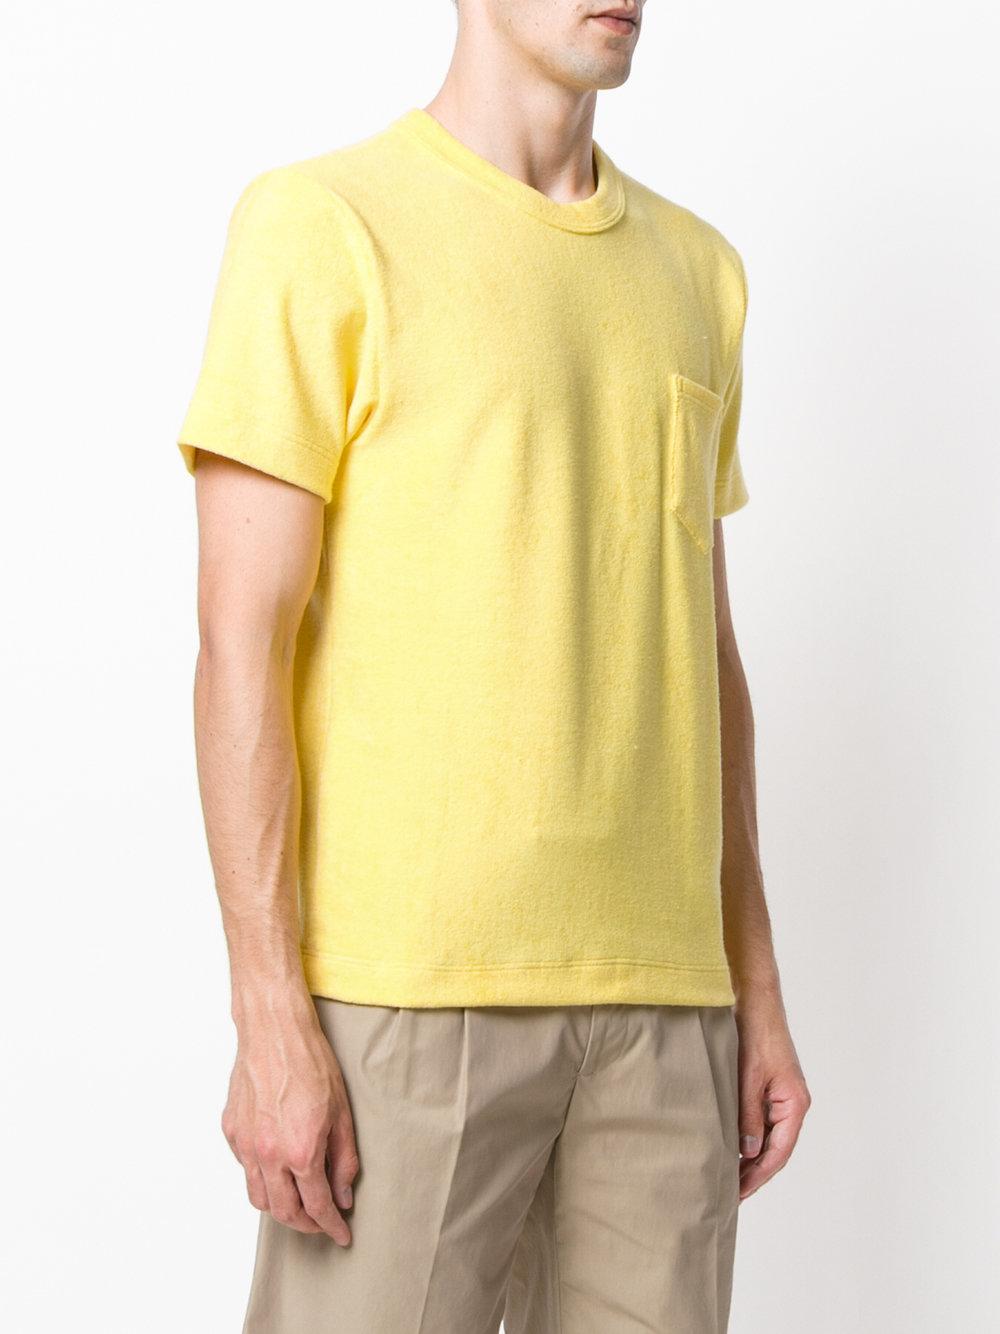 Lyst - Howlin' By Morrison Space Echo T-shirt in Yellow for Men